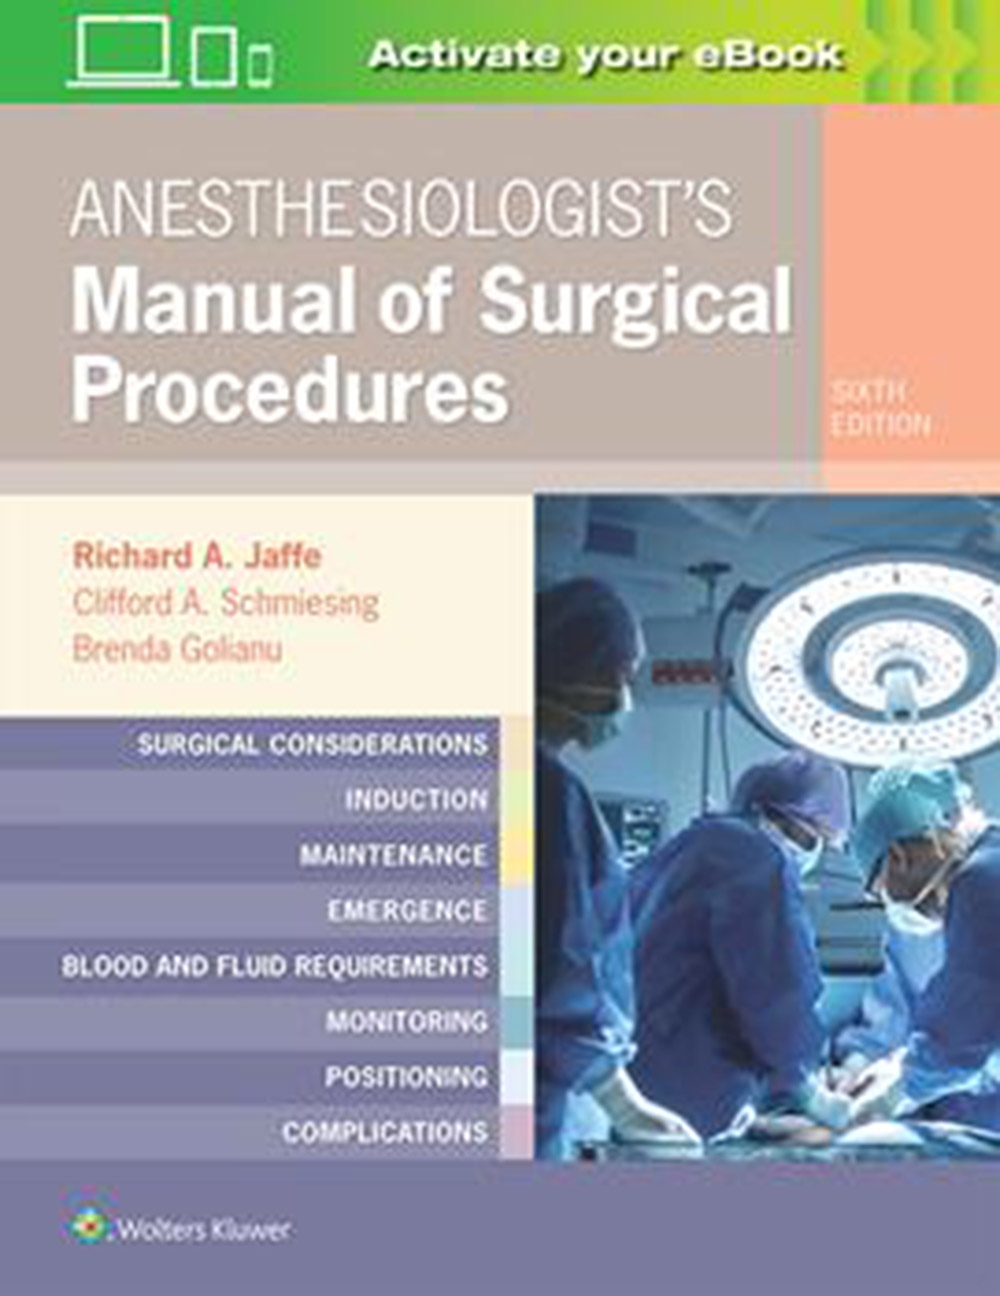 Anesthesiologist’s Manual of Surgical Procedures